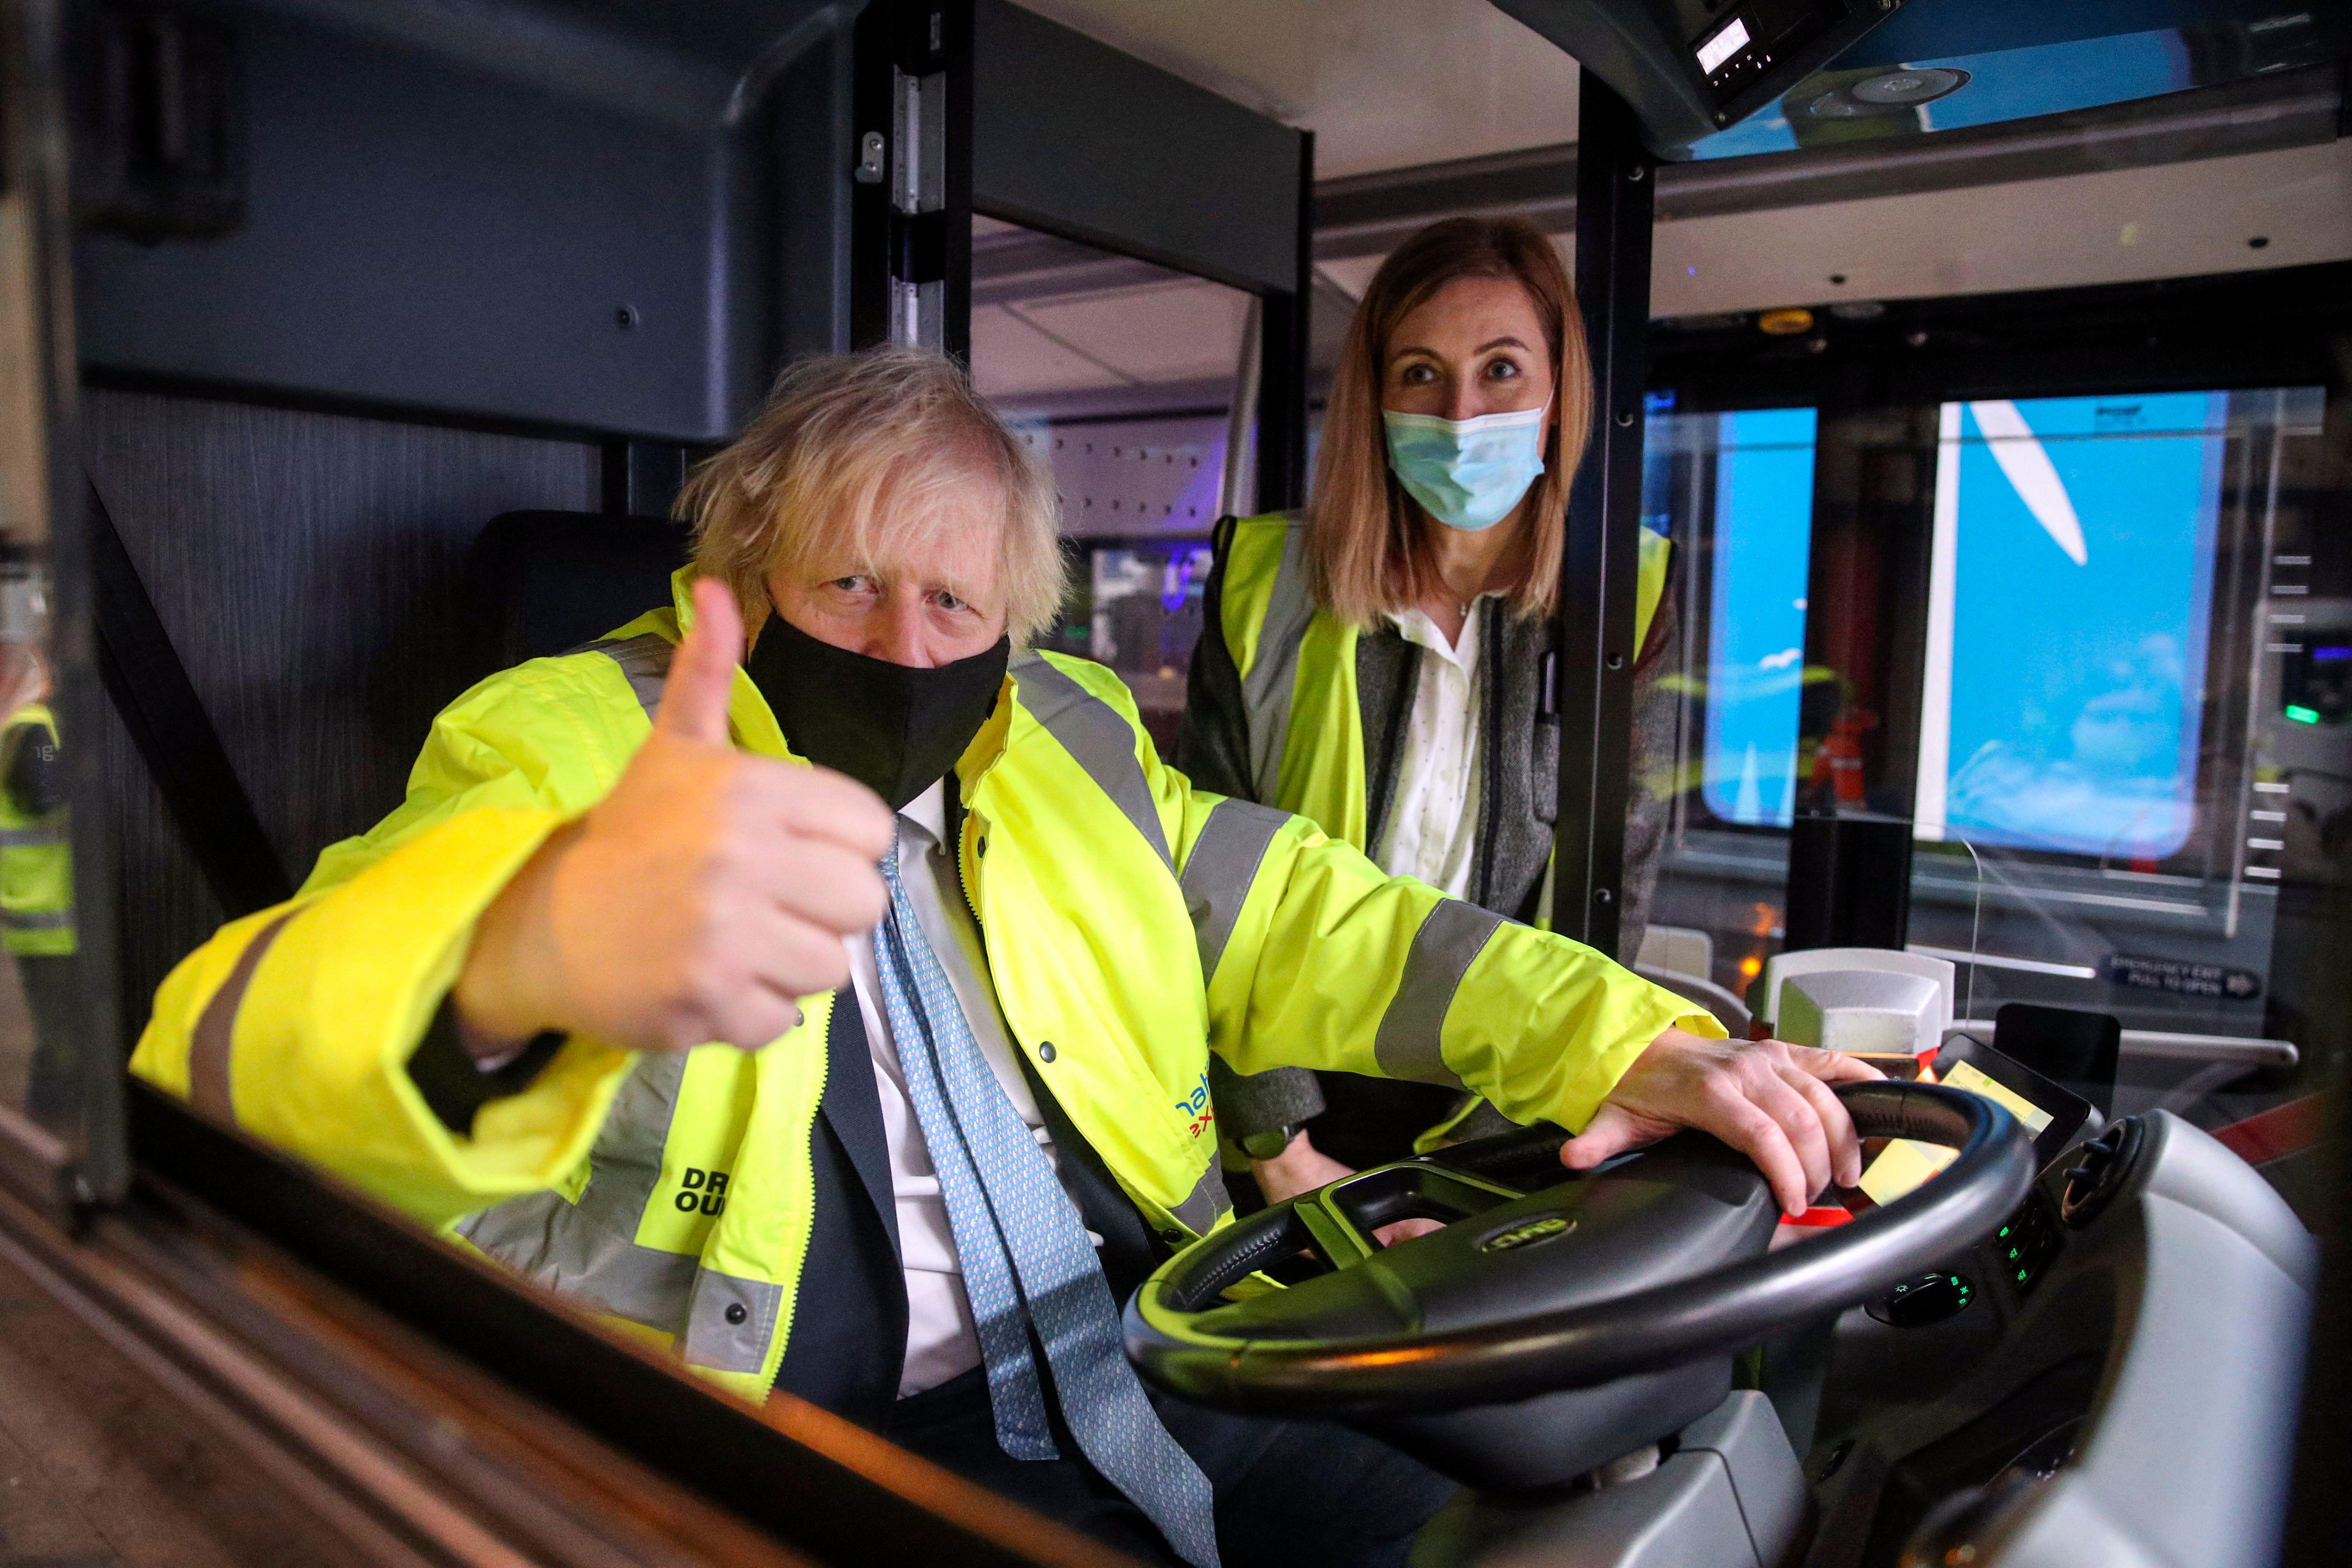 Boris Johnson wears a yellow high-visibility jacket and gives a thumbs-up as he sits behind the wheel of a bus.